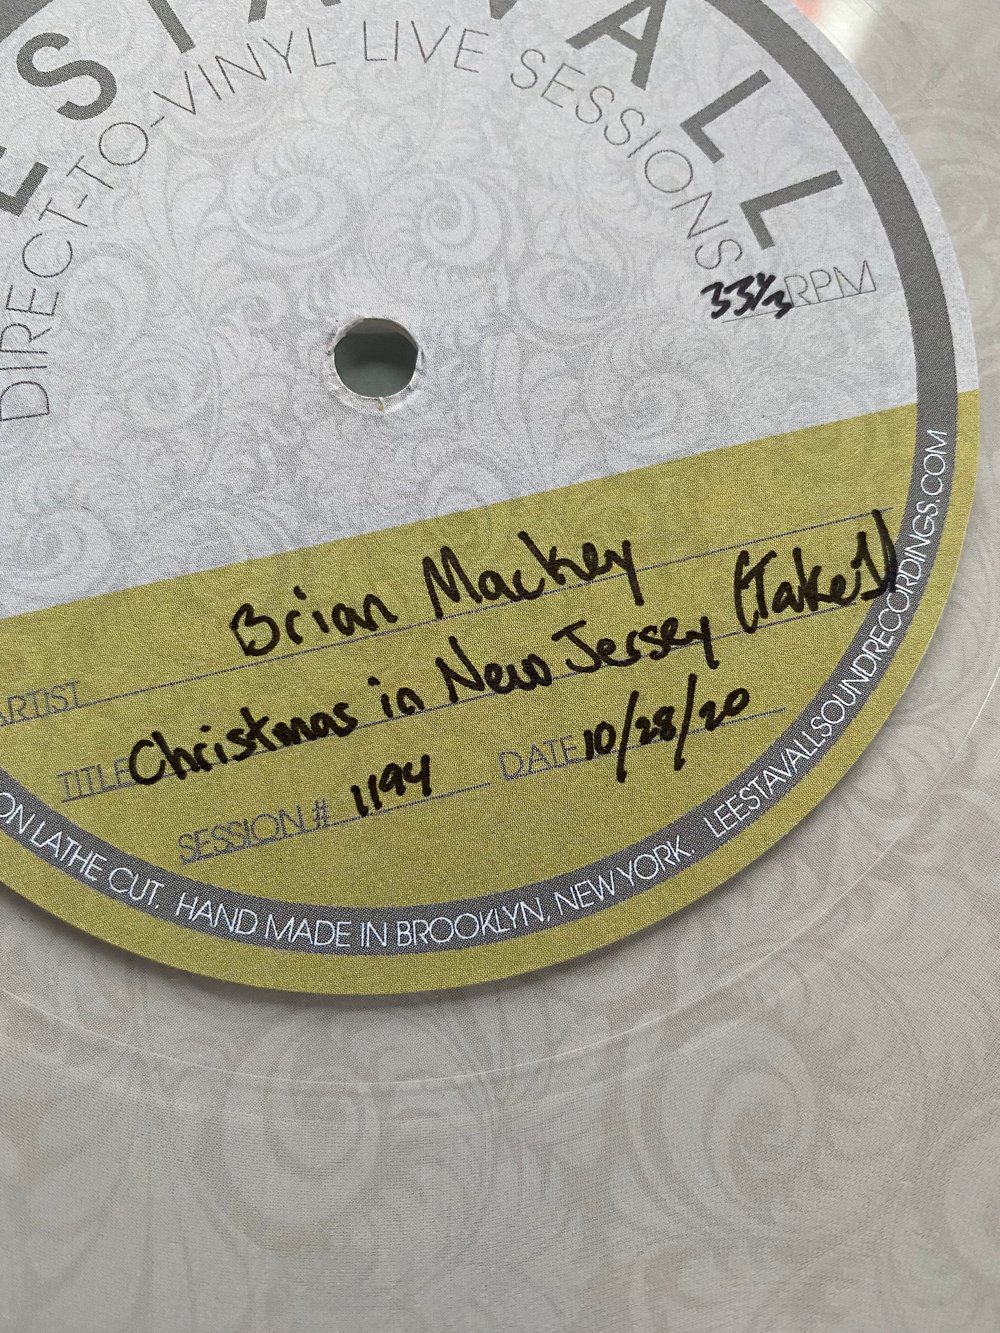 One of a Kind - Direct to Vinyl - Brian Mackey  "Christmas In New Jersey"